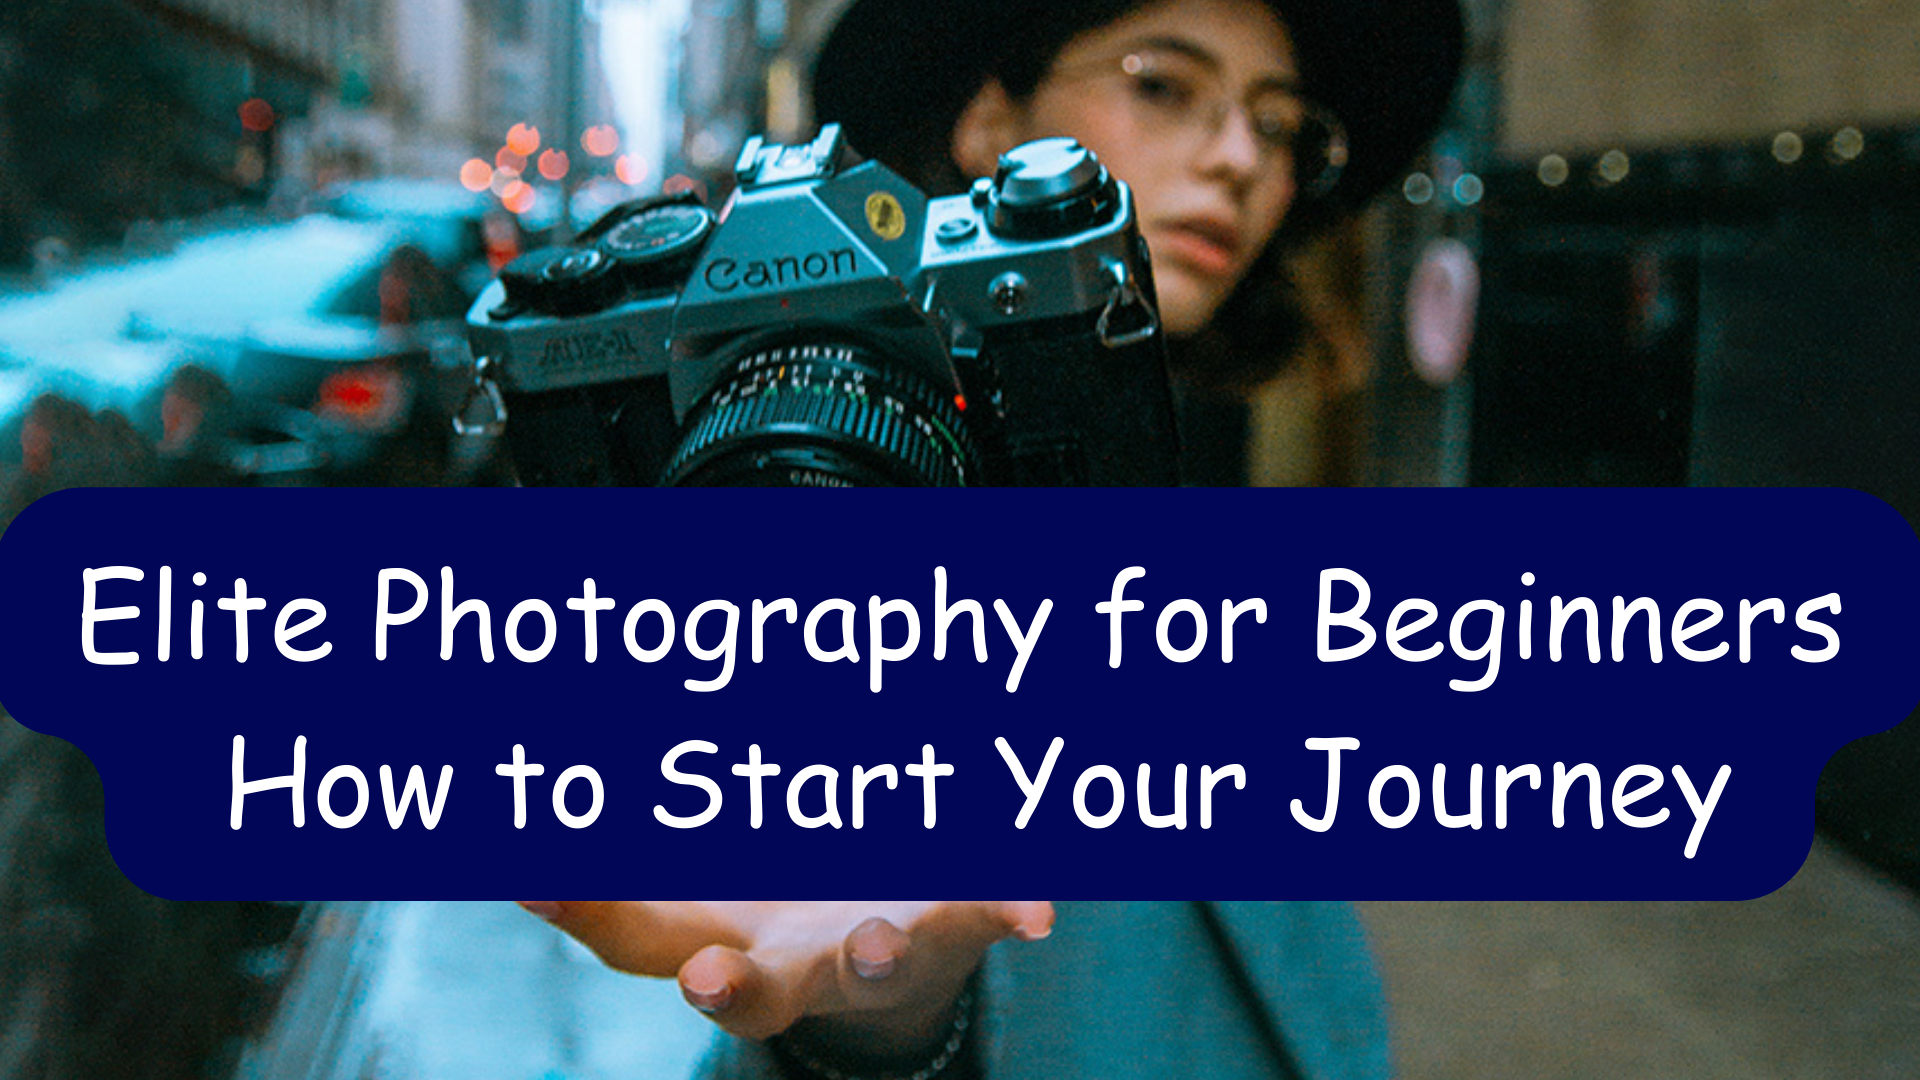 Elite Photography for Beginners: How to Start Your Journey